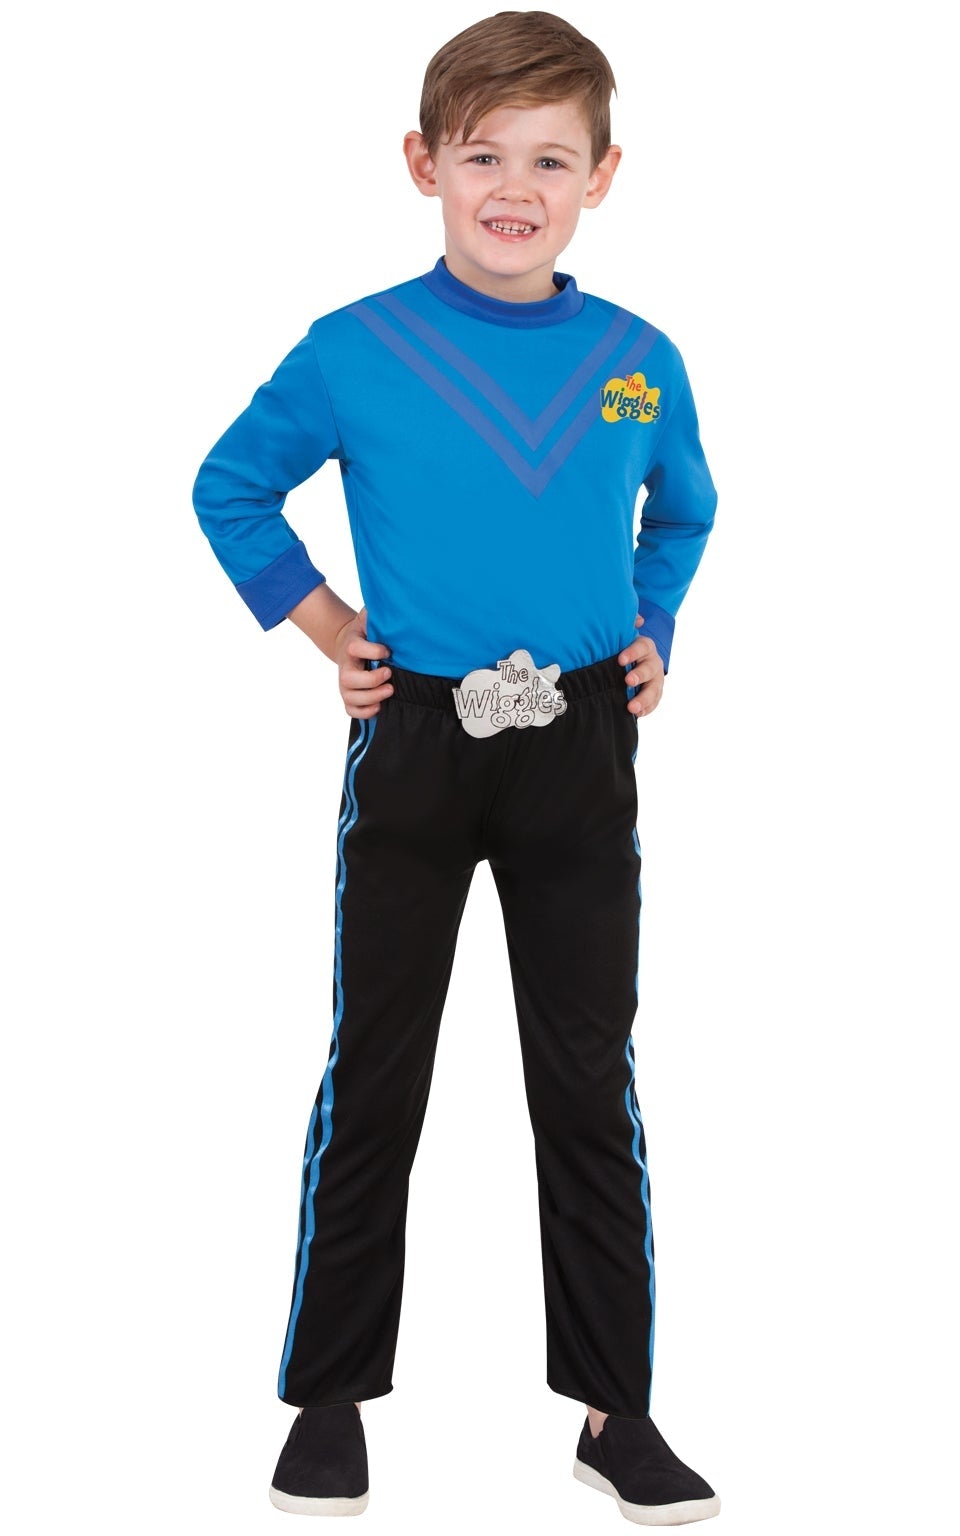 Anthony Wiggle Deluxe Kids Costume_1